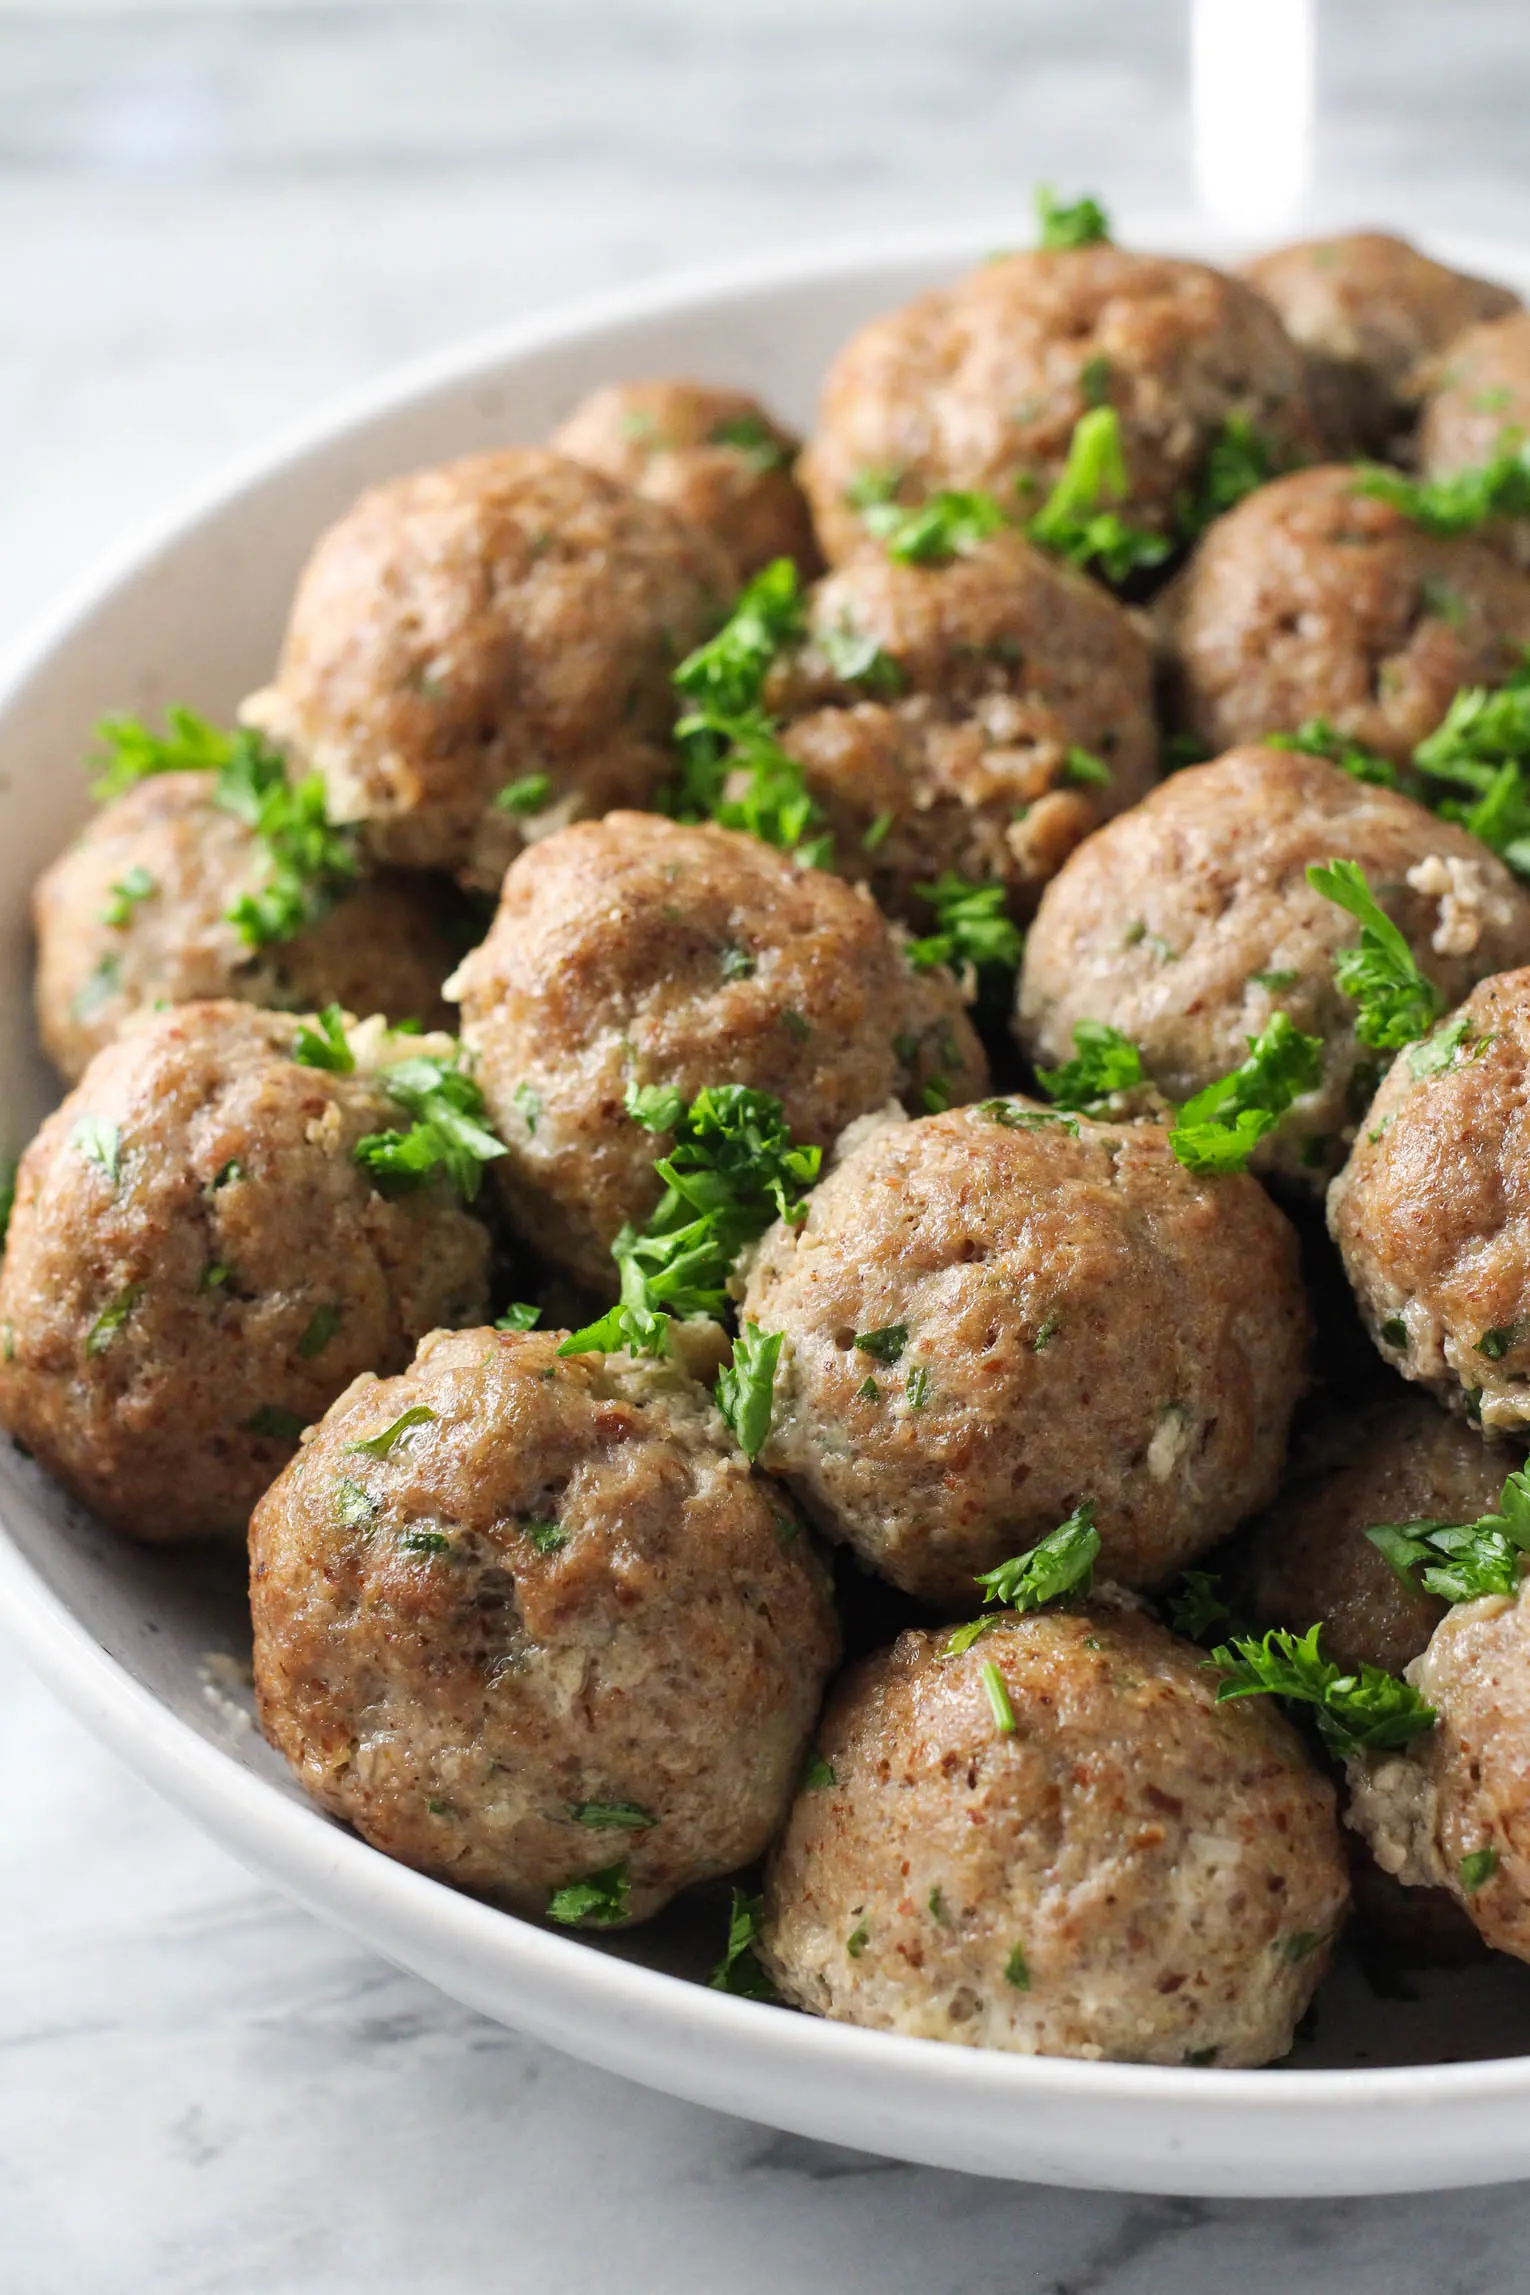 Meatballs without breadcrumbs in a white bowl garnished with chopped parsley.